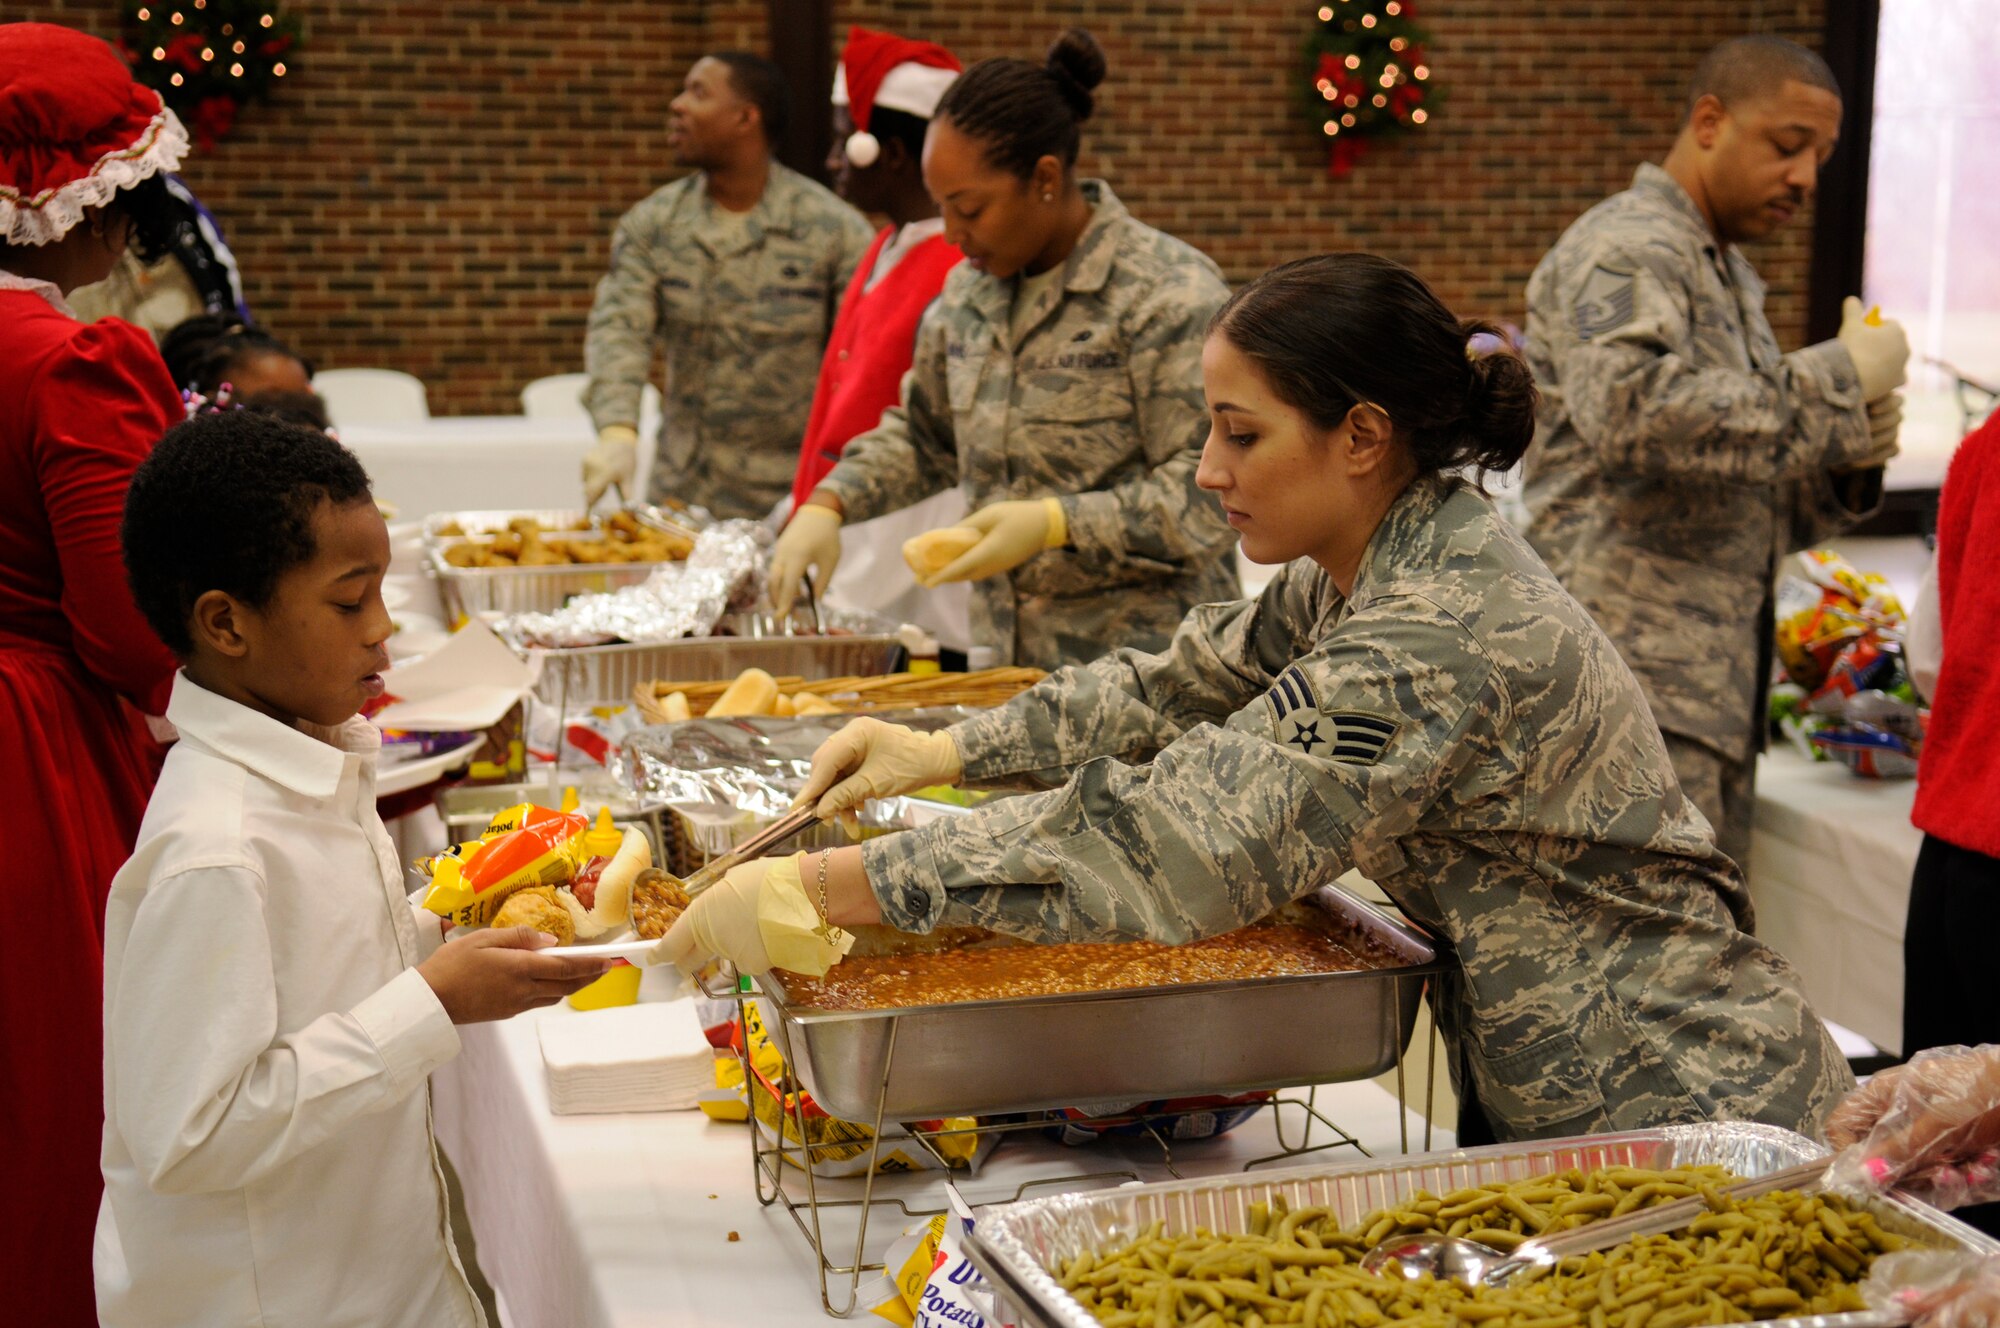 Senior Airman Dessie Centeno-Lopez, 11th Logistics Readiness Squadron, serves lunch to an elementary school student during the 39th annual 7th District Christmas Party Dec. 12 in Washington. Eighteen Airmen from Bolling AFB and the Pentagon volunteered to put shoes on the feet of 220 children, serve food, wrap gifts and clean up. (U.S. Air Force photo by Staff Sgt. Dan DeCook)